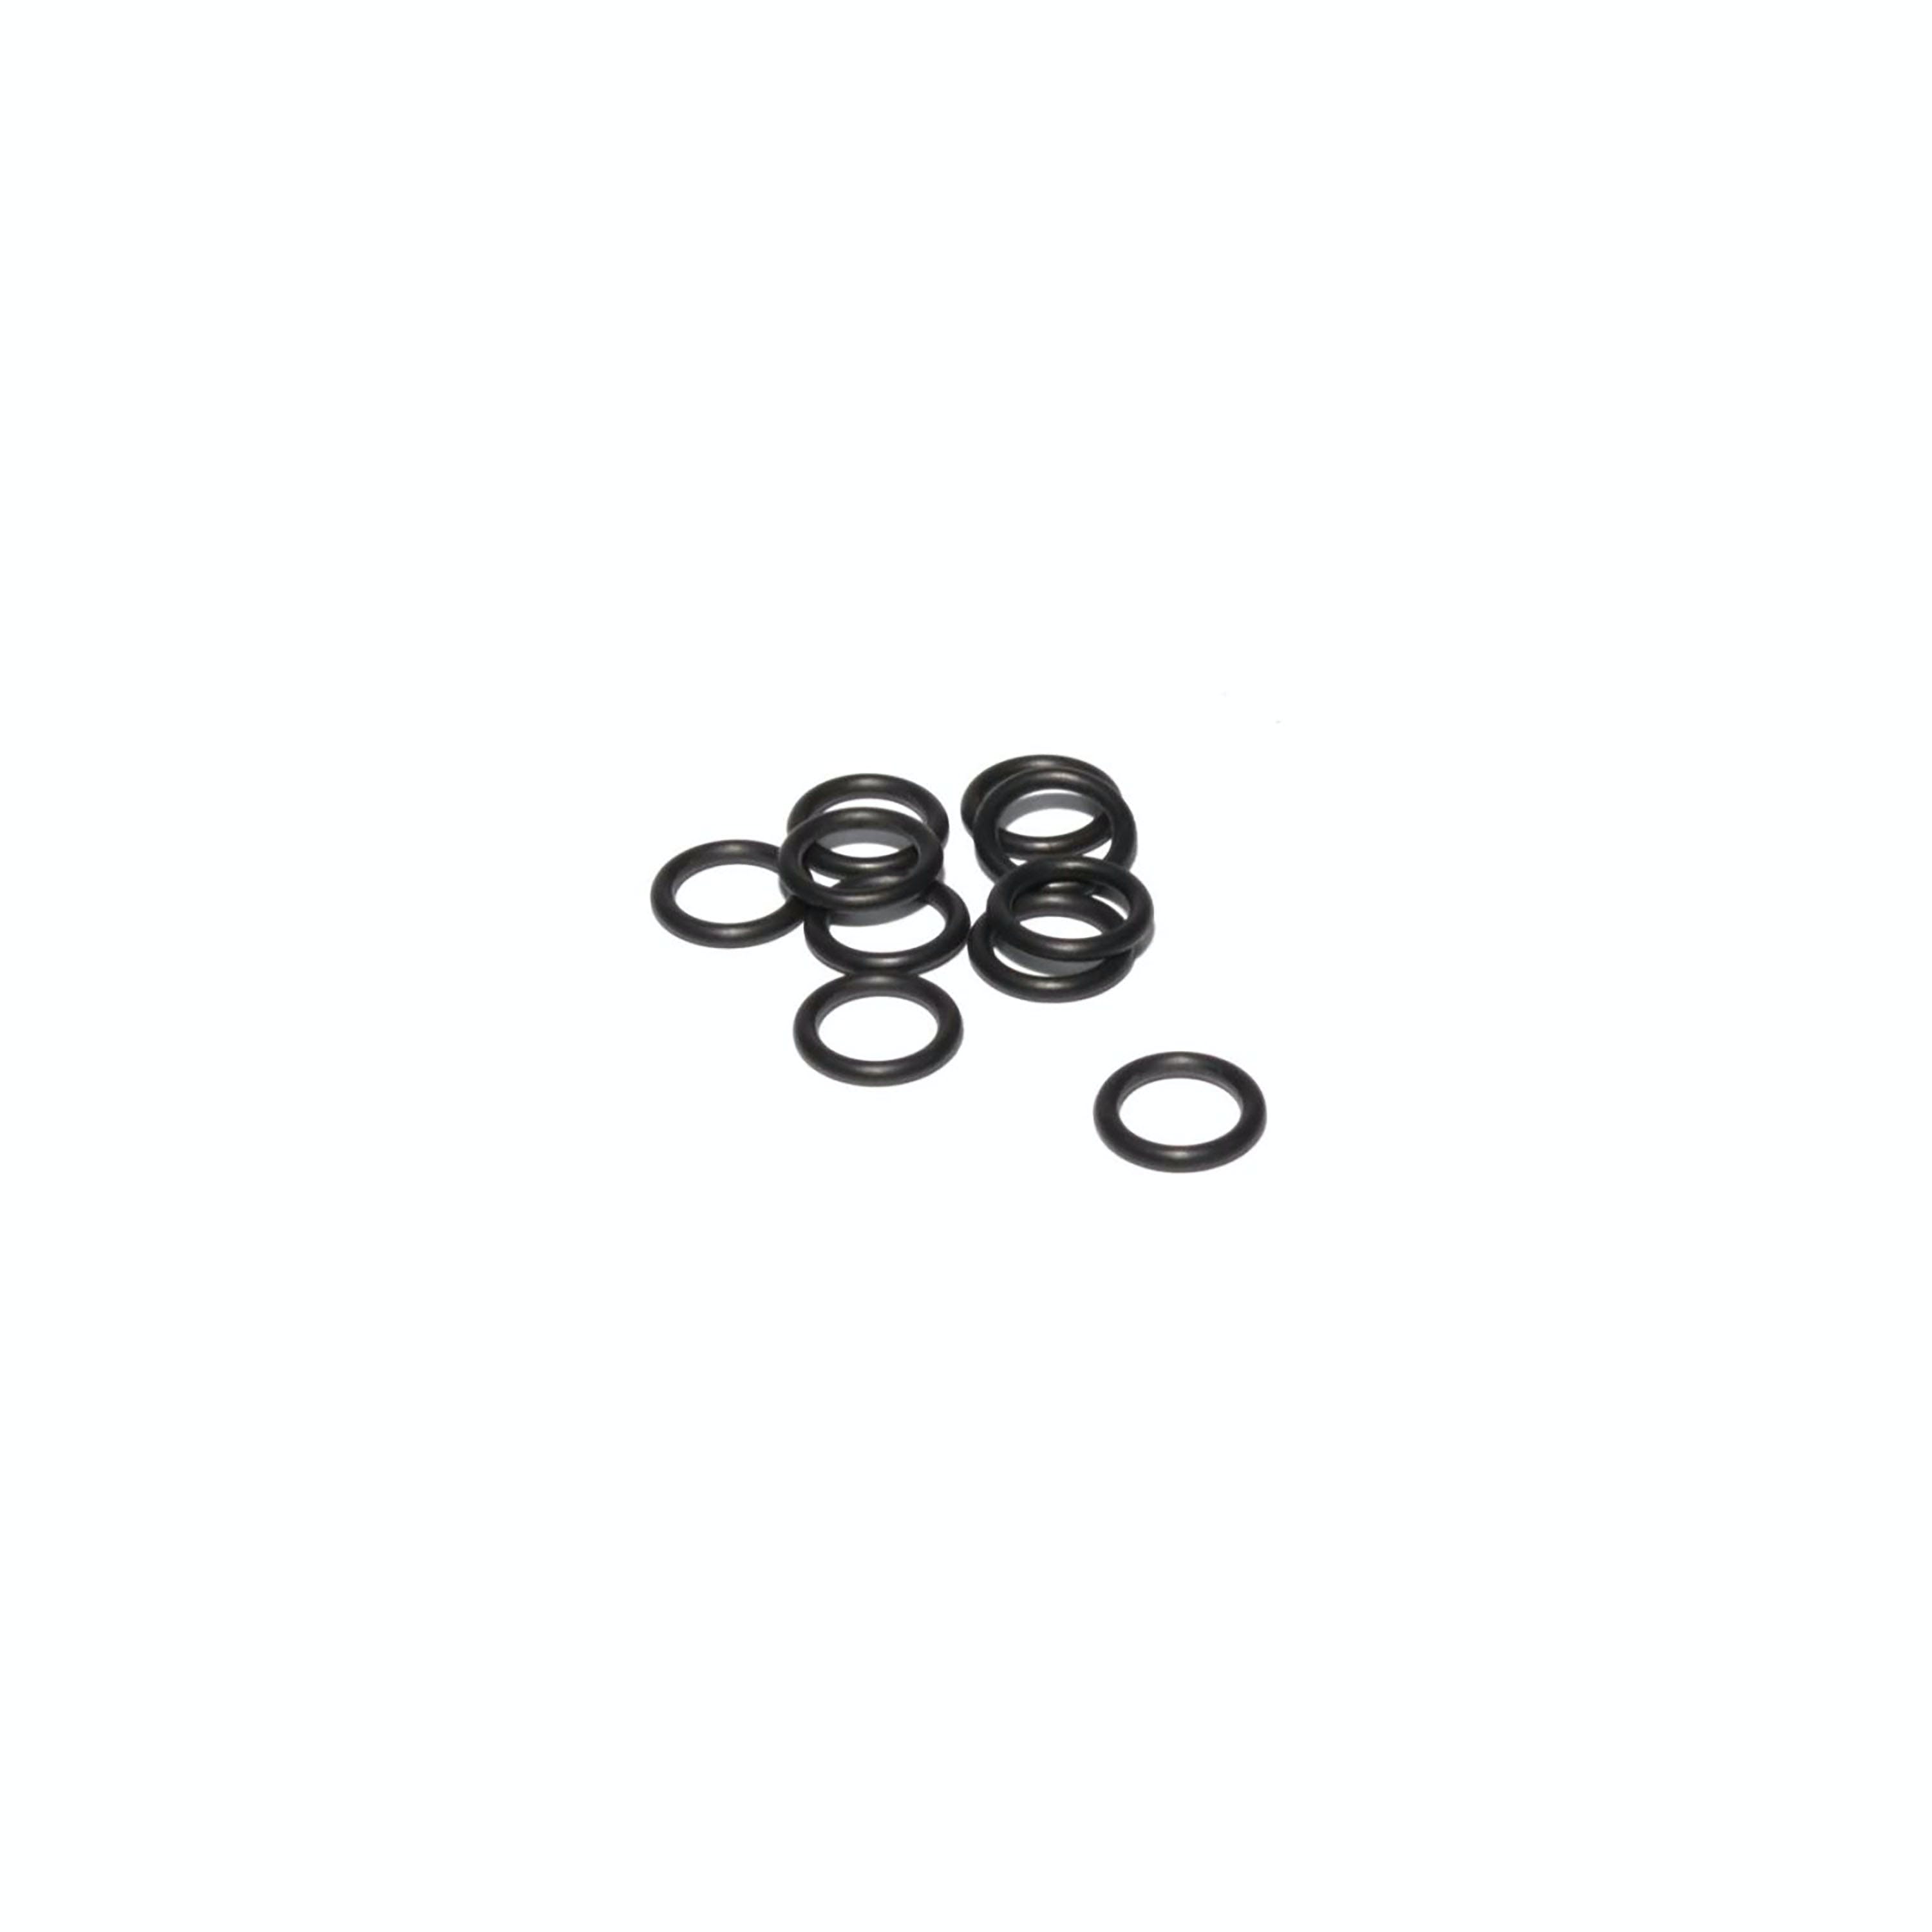 FAST - Fuel Air Spark Technology 30251OR-10 O-Rings, For -6 SAE Fittings ( 10 Pack)